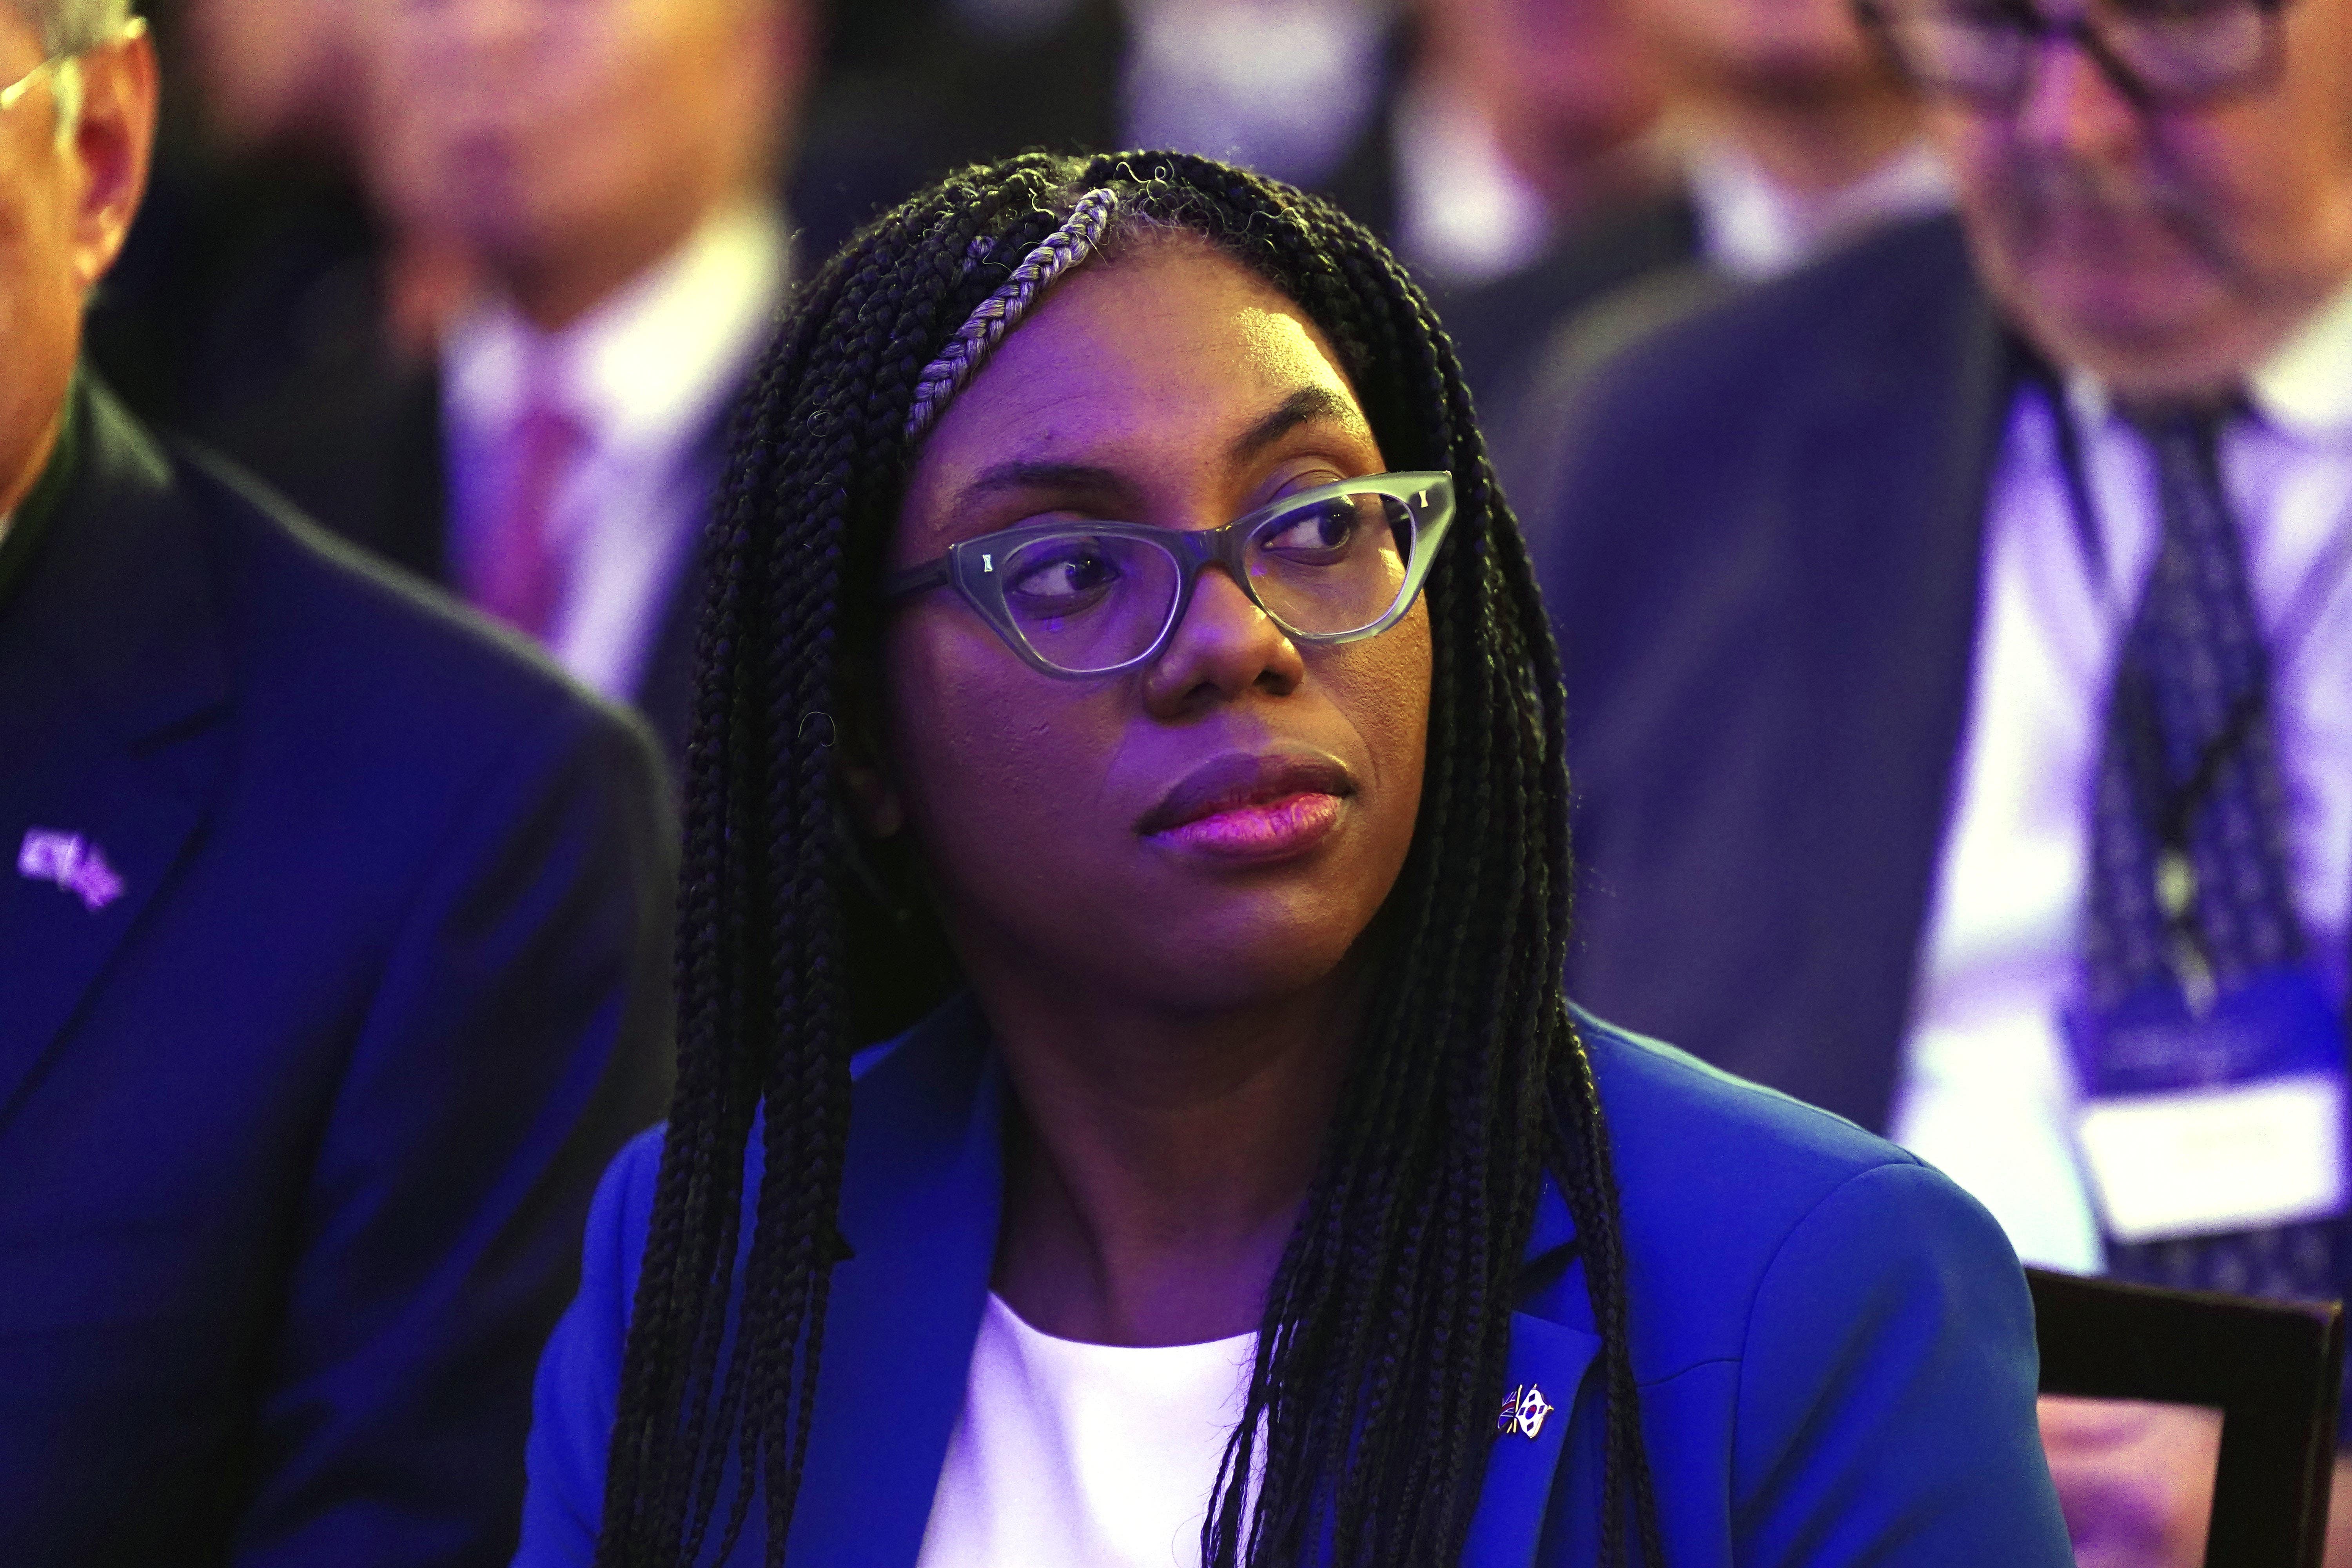 Kemi Badenoch claims ‘global Britain is thriving on the world stage’